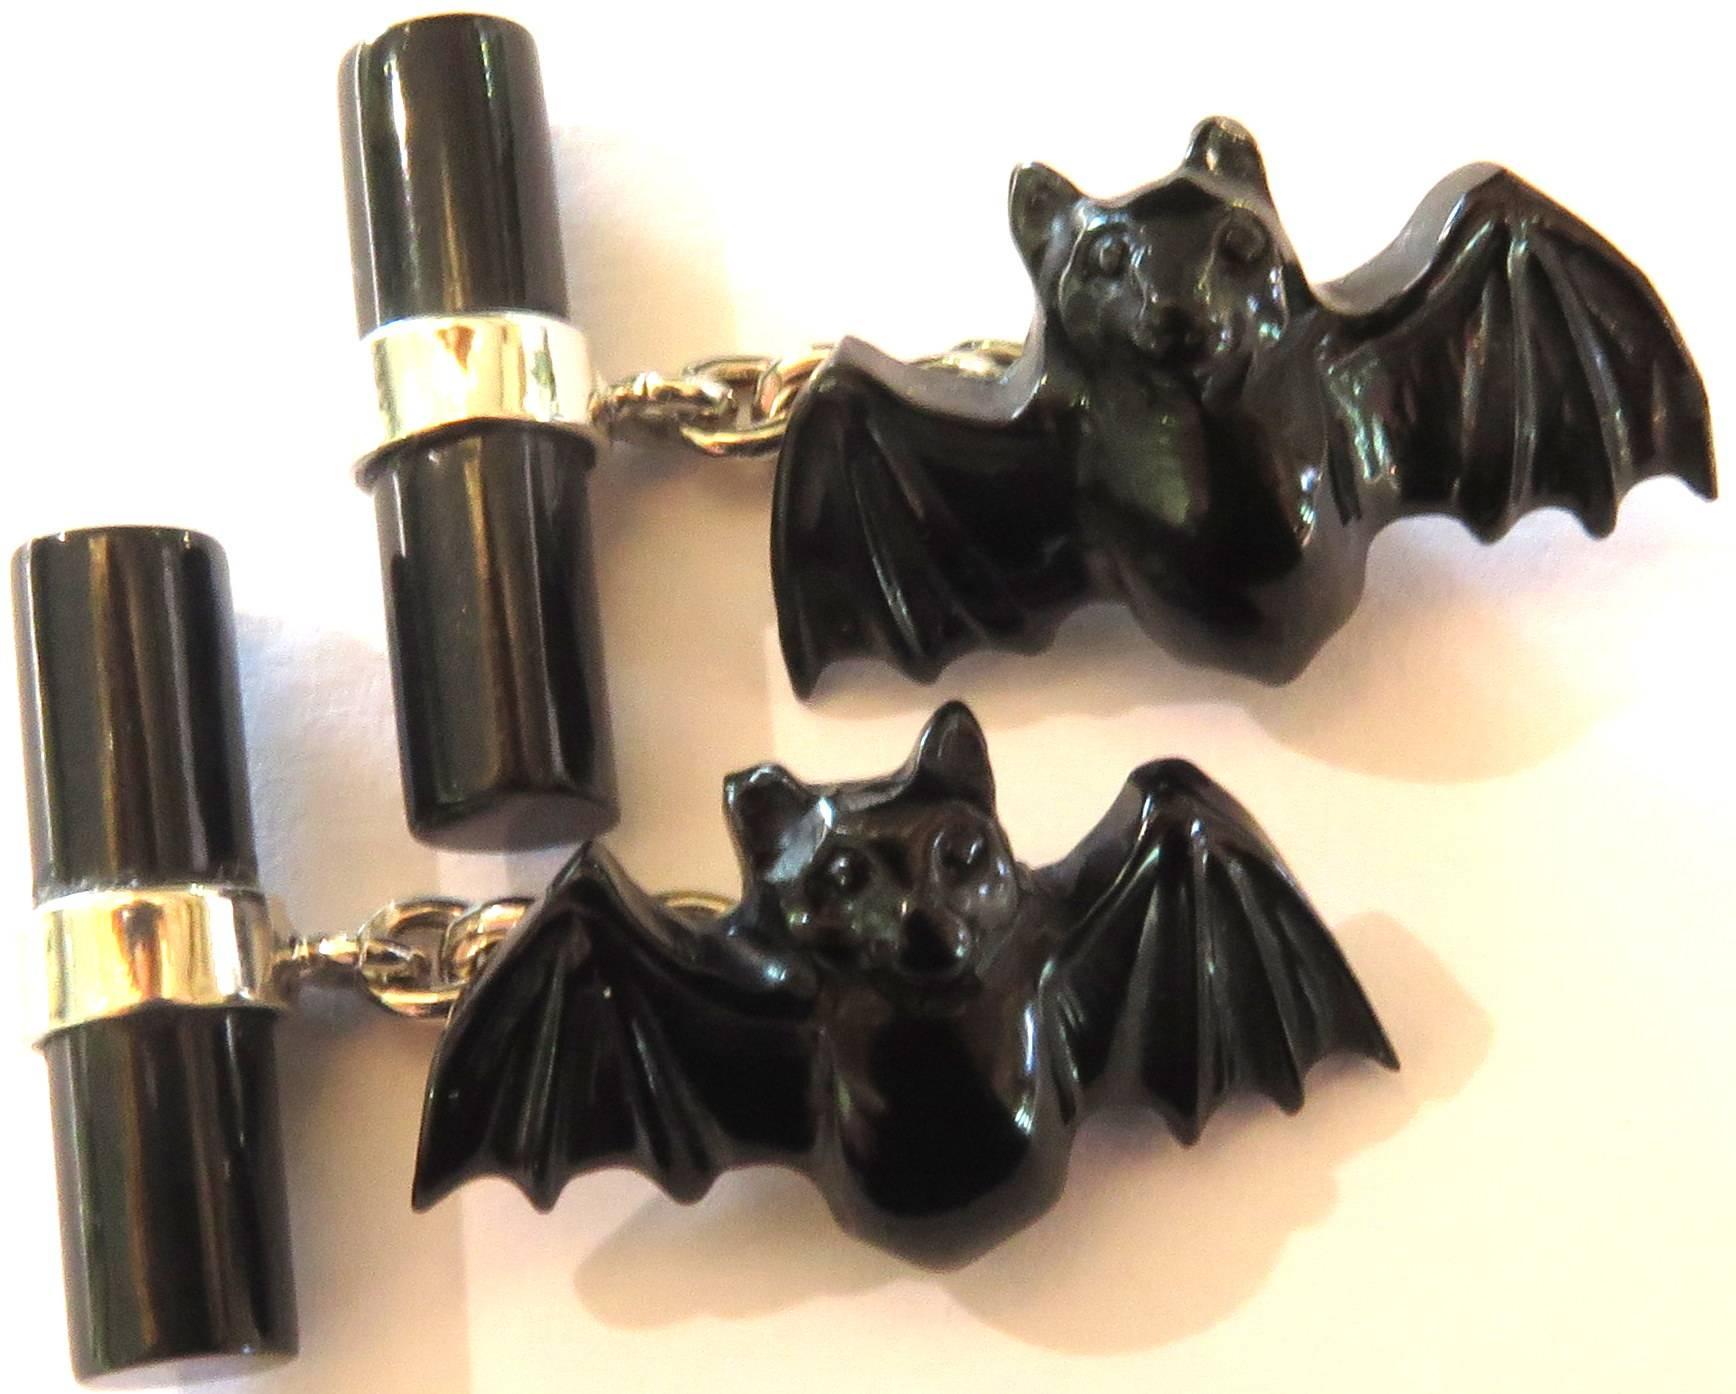 These wonderful bat cufflinks are set in 18k white gold. You will enjoy these timeless critters for more eternity. Each bat is hand carved onyx and would be a great addition to anyone's cufflink collection!
The length of each bat is approx 15/16th